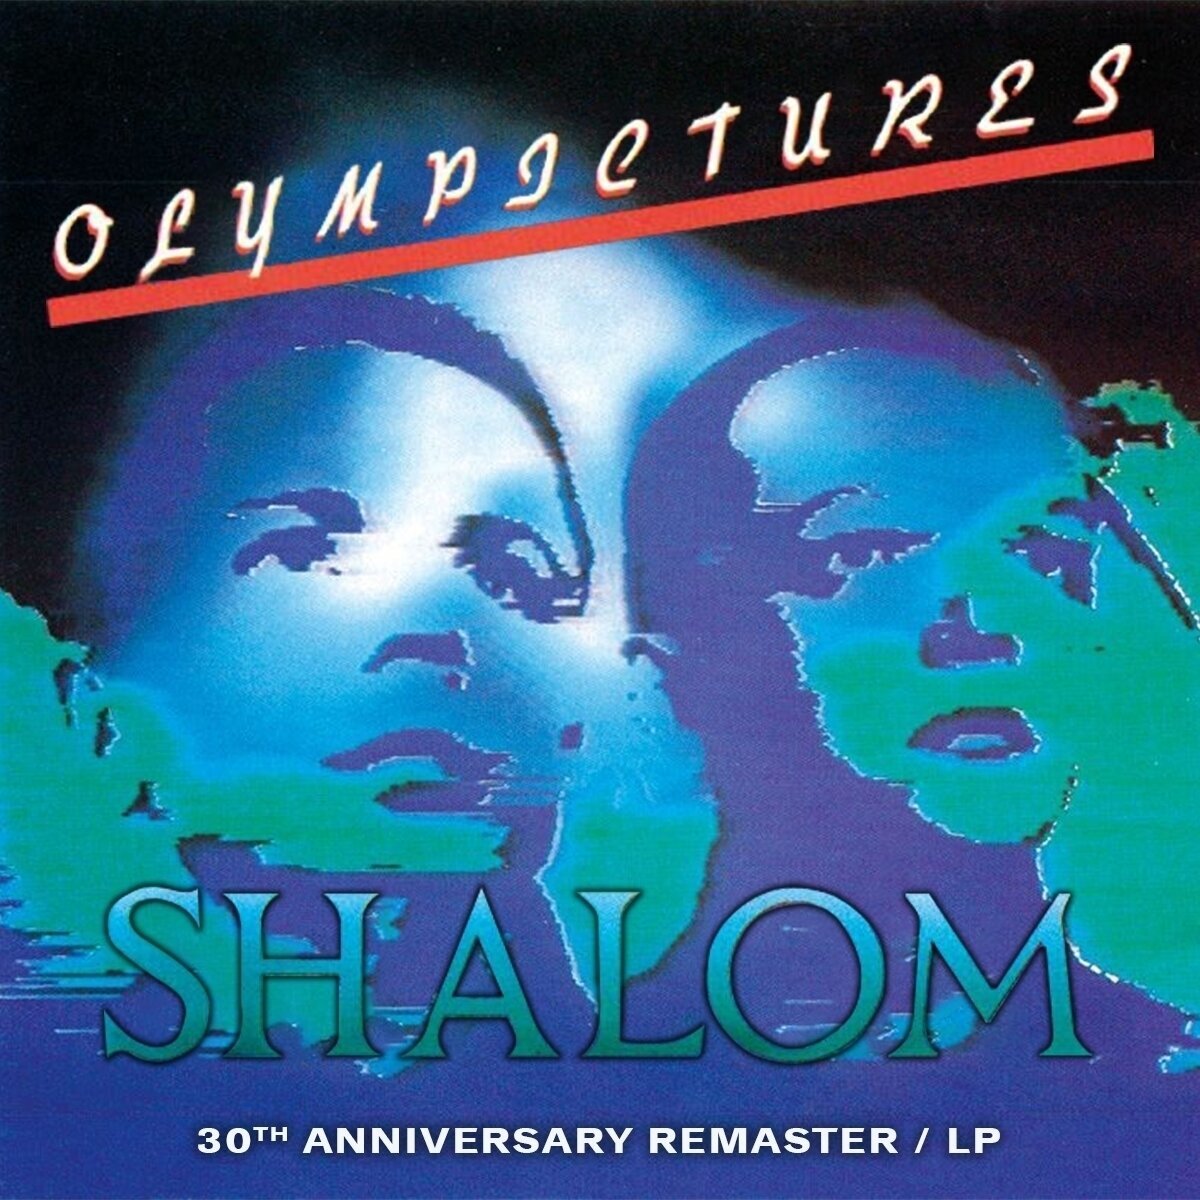 LP Shalom - Olympictures (30th Anniversary) (Remastered) (LP)